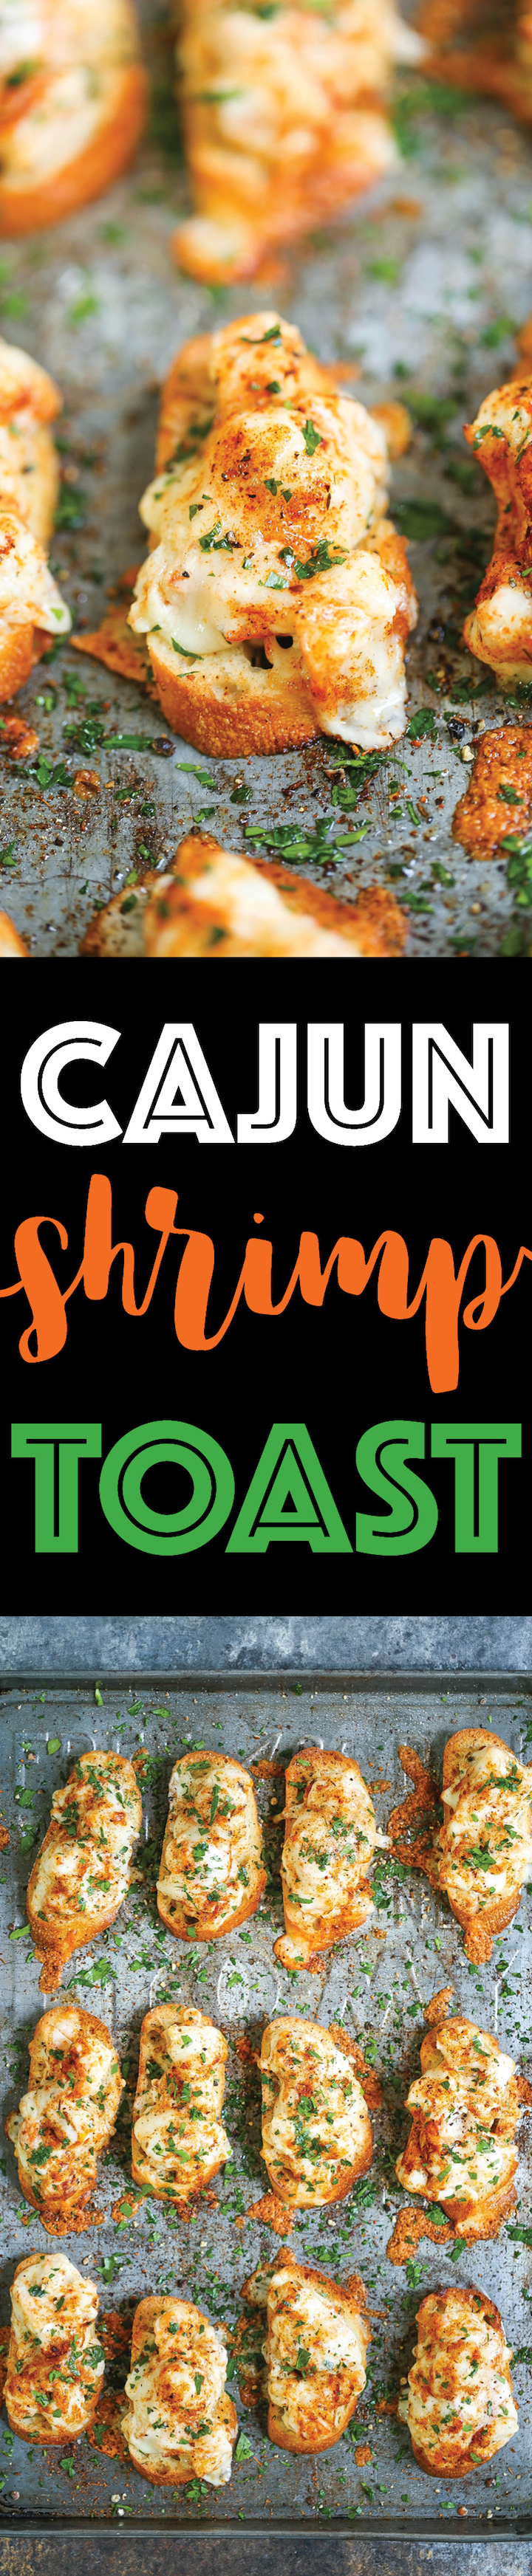 Cajun Shrimp Toast - Bite-sized SHRIMP TOAST! With the creamiest, cheesiest shrimp topping with Parmesan and mozzarella! You won't be able to stop at 1!